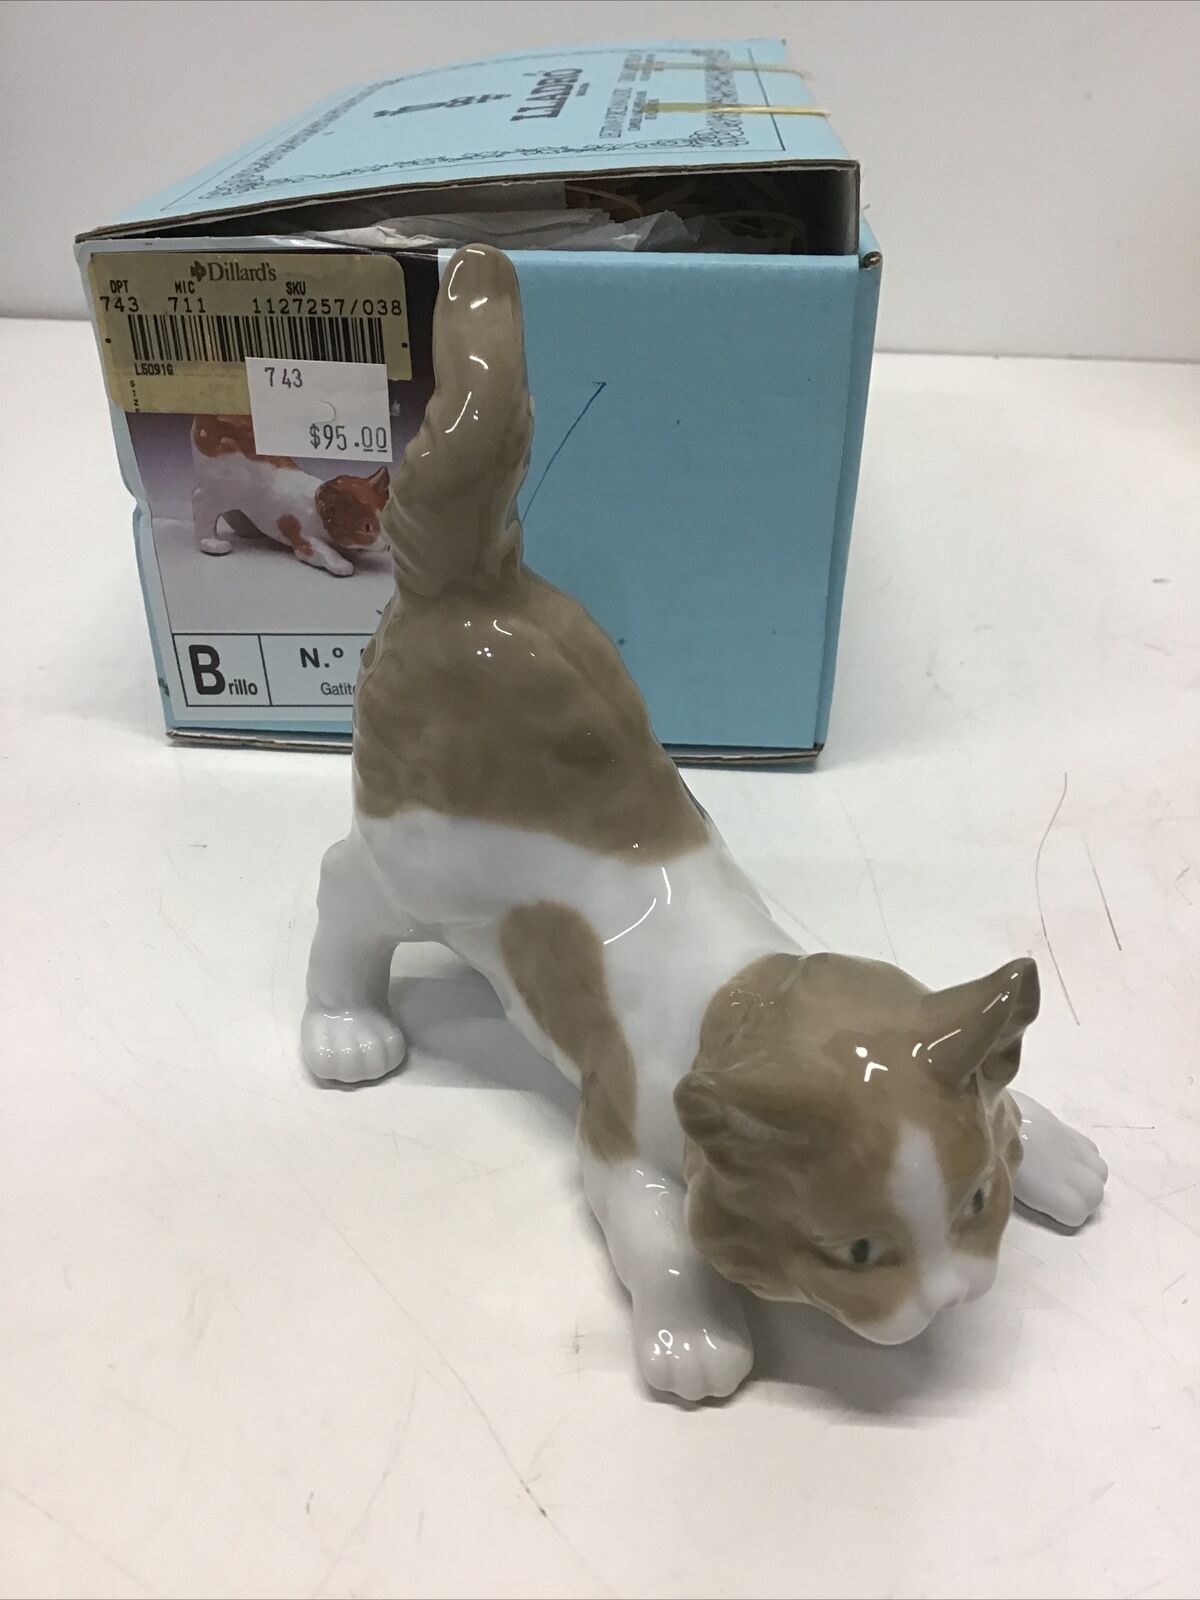 Lladro 5091 Playful Cat Retired in Original Box, Mint Condition 1979 Backstamp